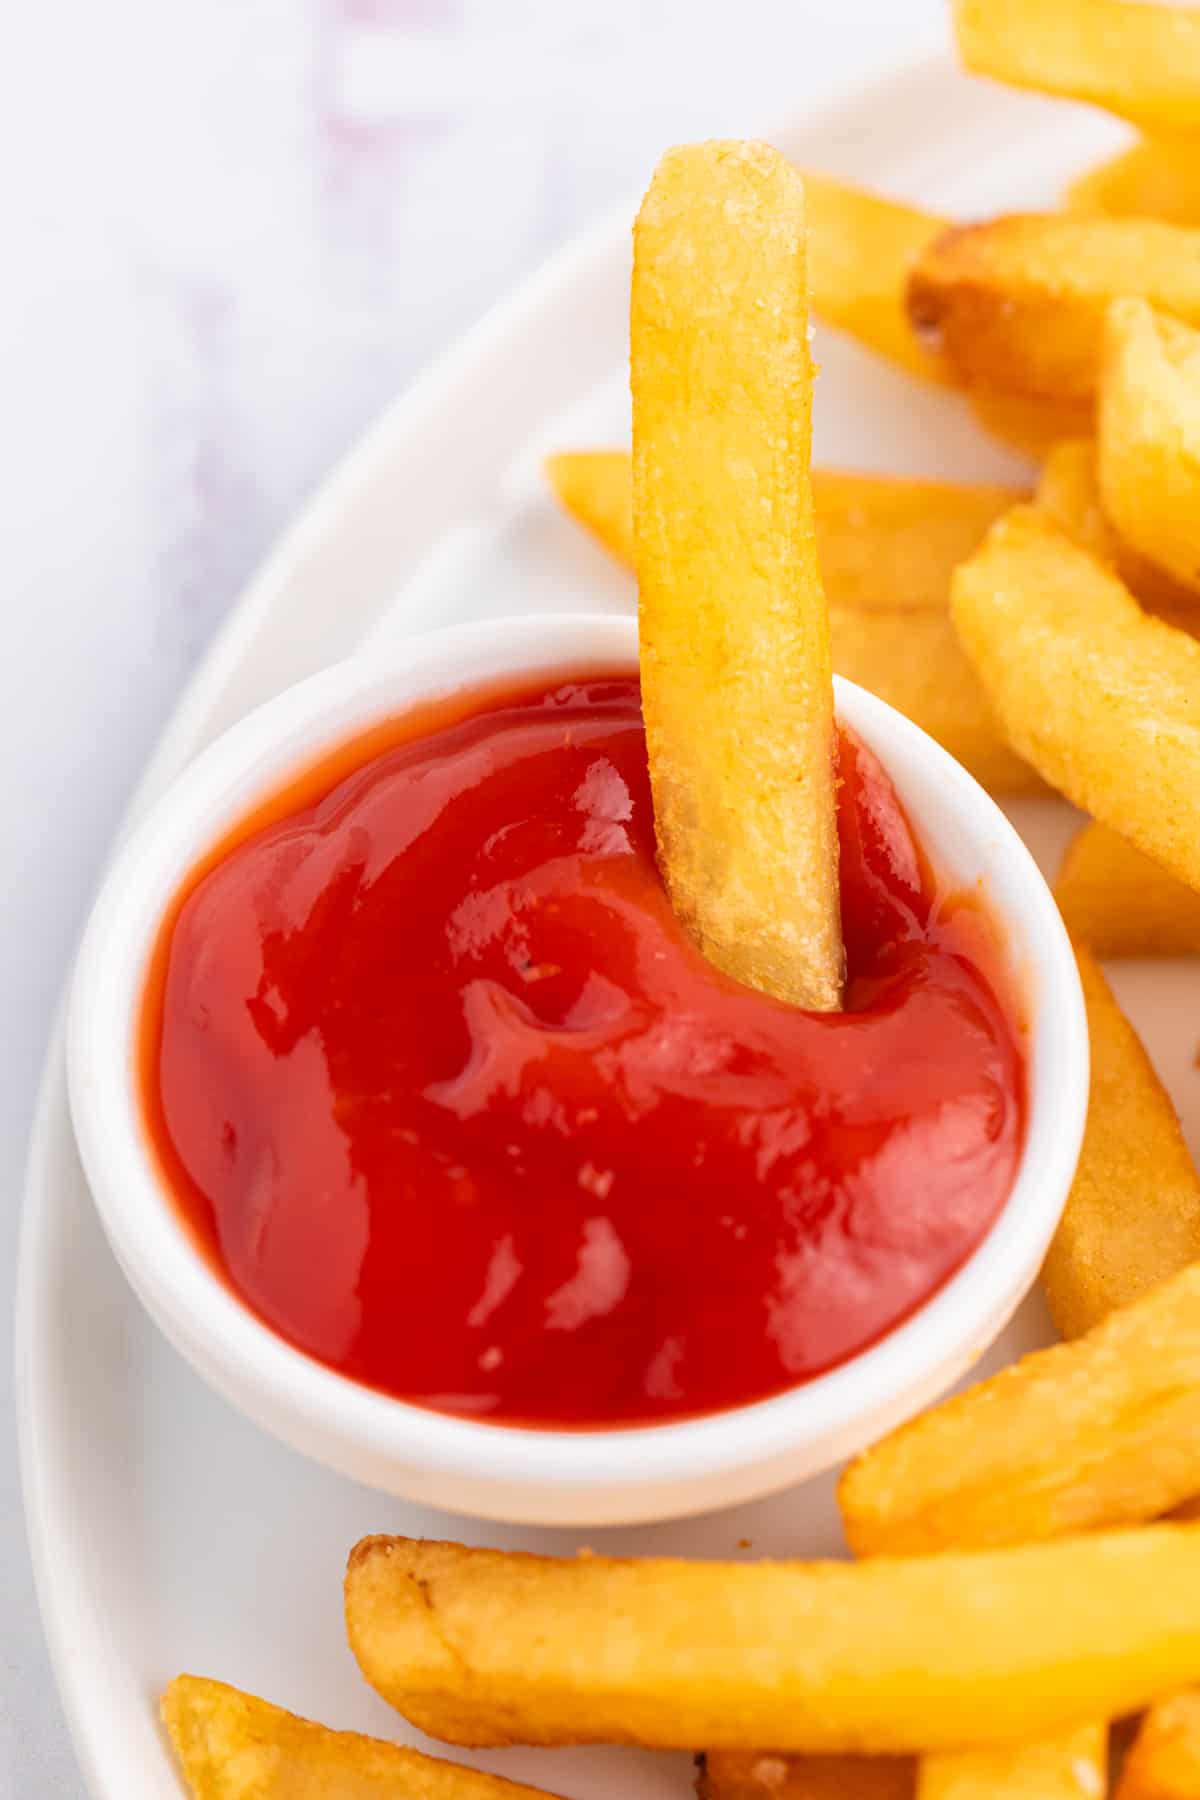 A french fry in a dipping sauce filled with ketchup.